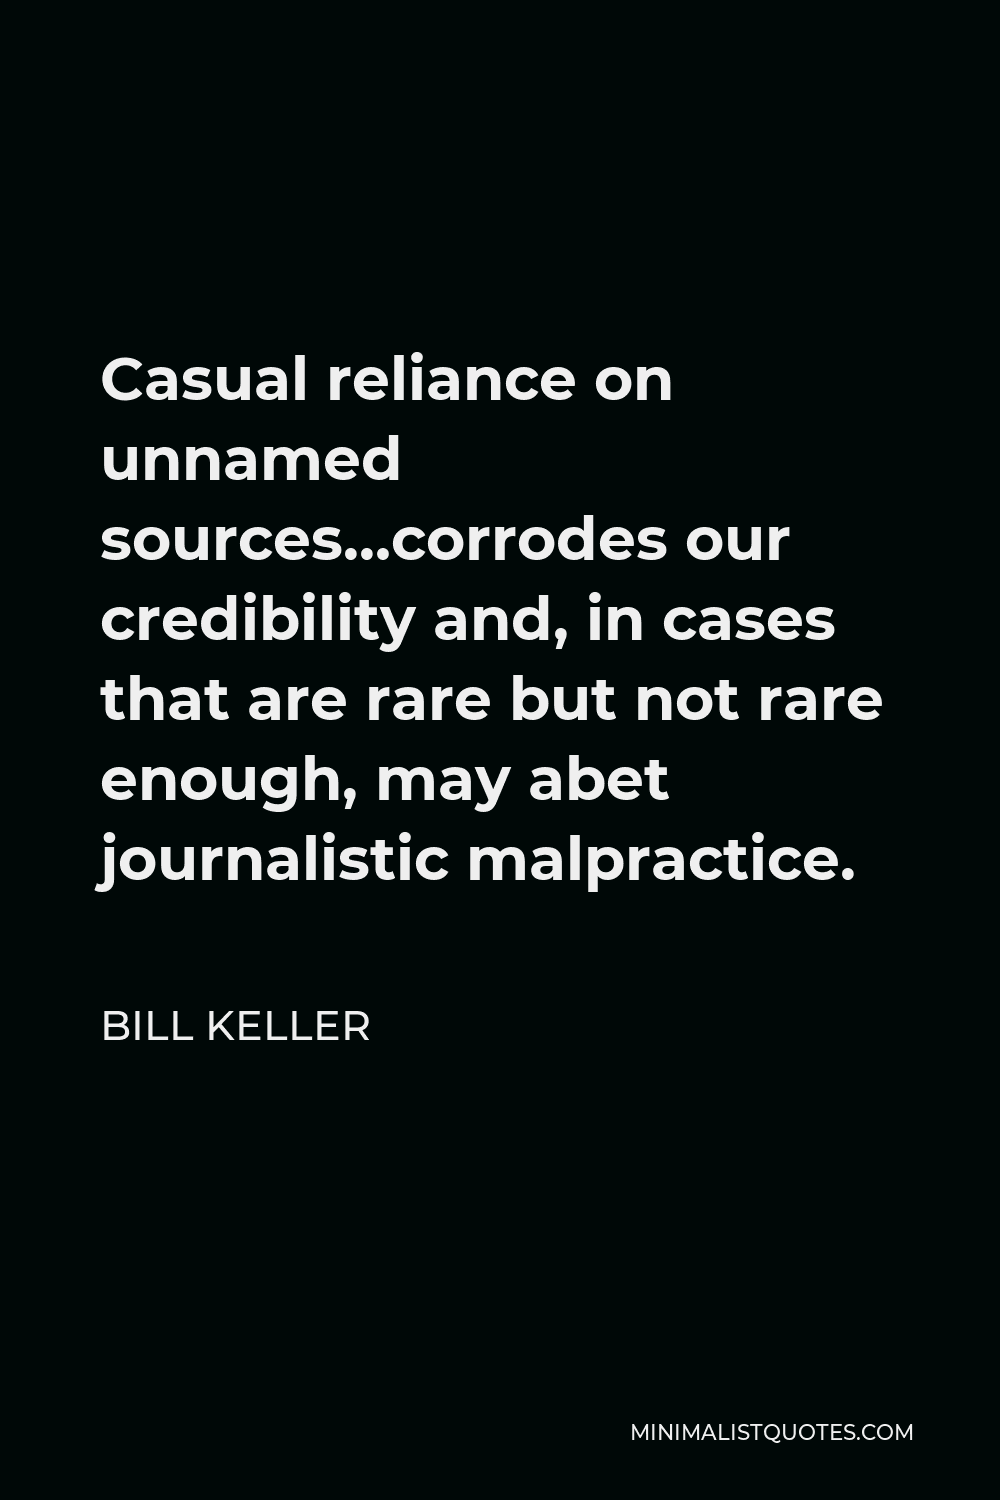 Bill Keller Quote - Casual reliance on unnamed sources…corrodes our credibility and, in cases that are rare but not rare enough, may abet journalistic malpractice.